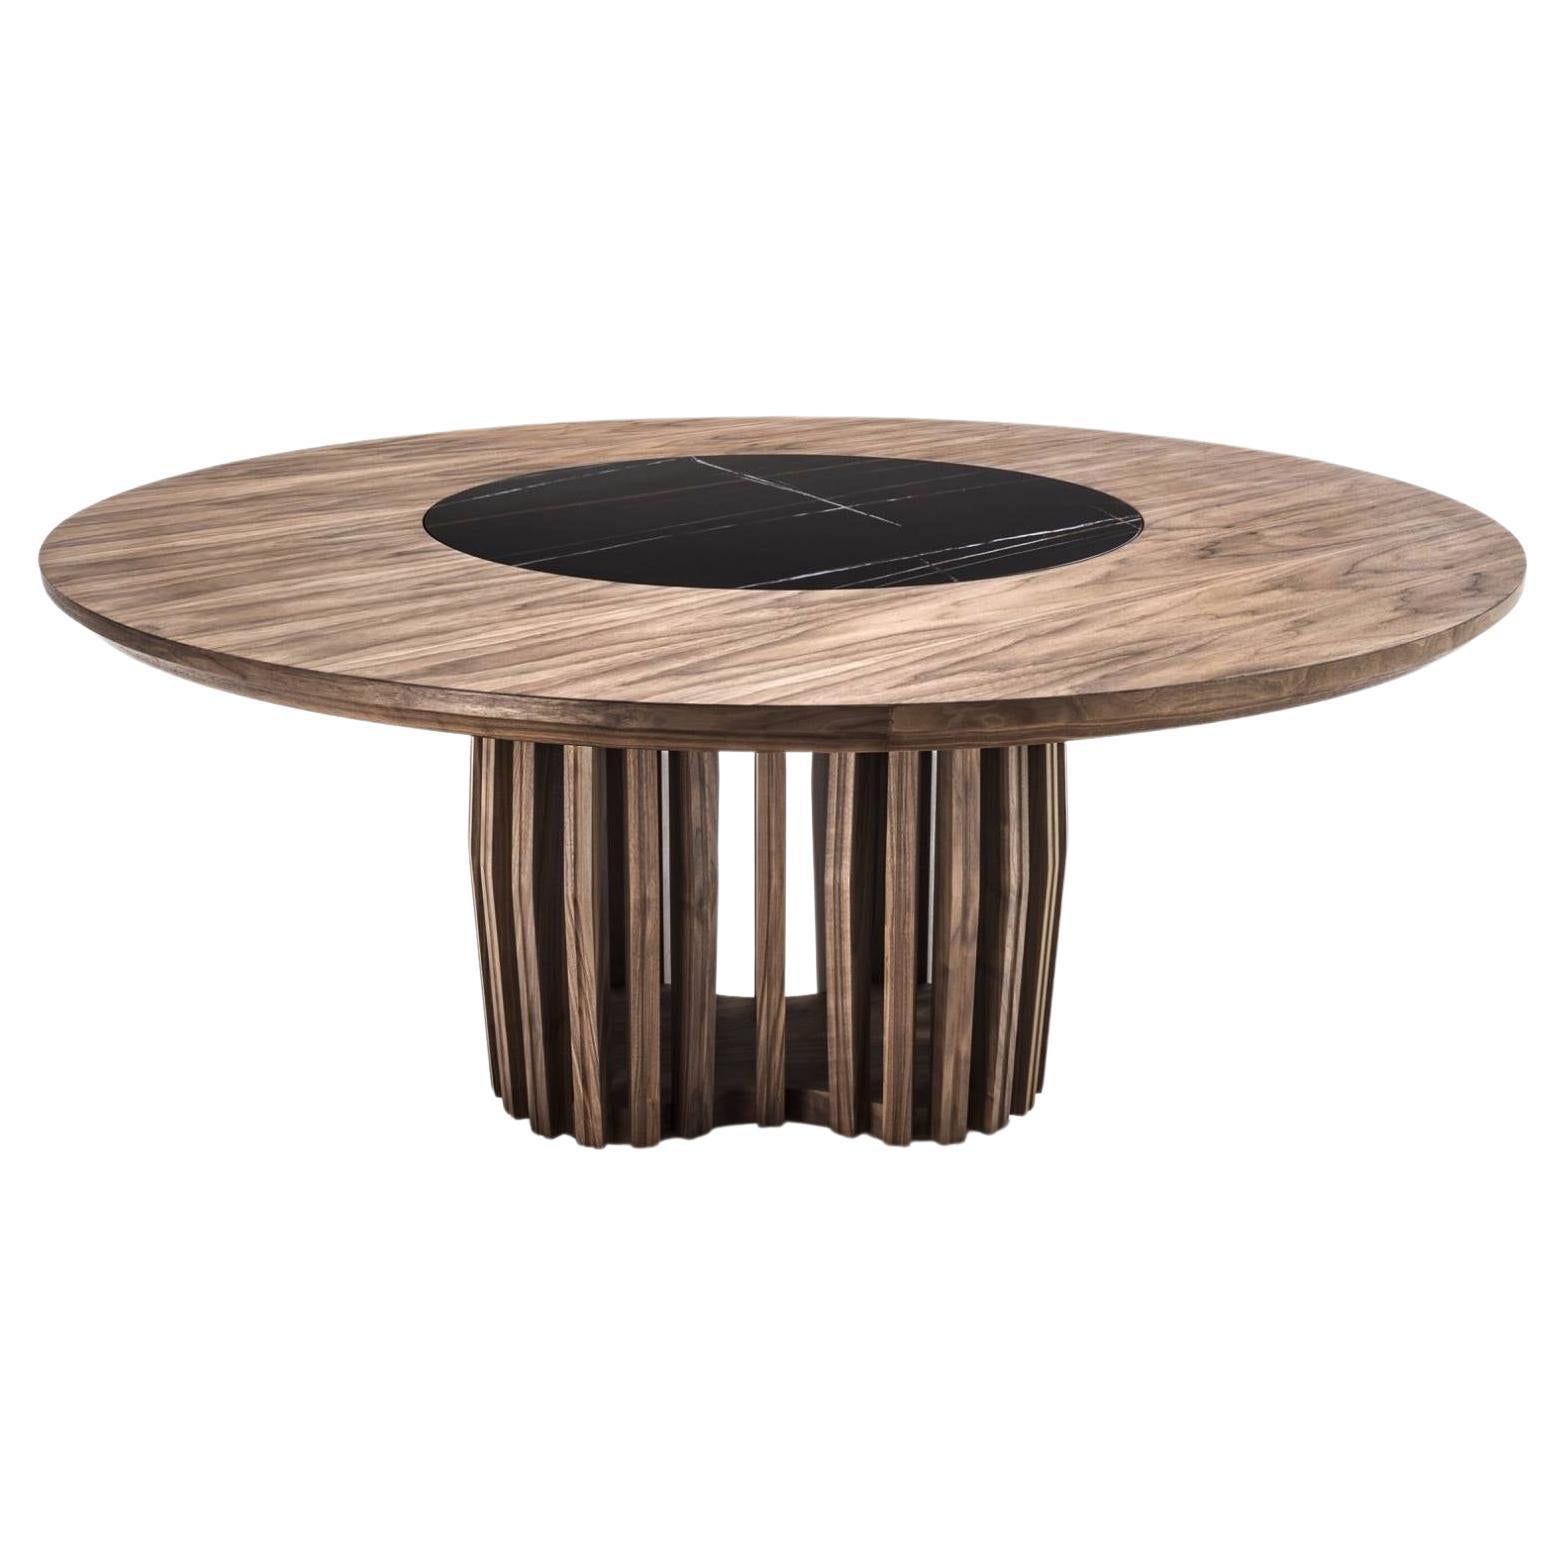 Round Solid Wood Table with Marble Lazy Susan